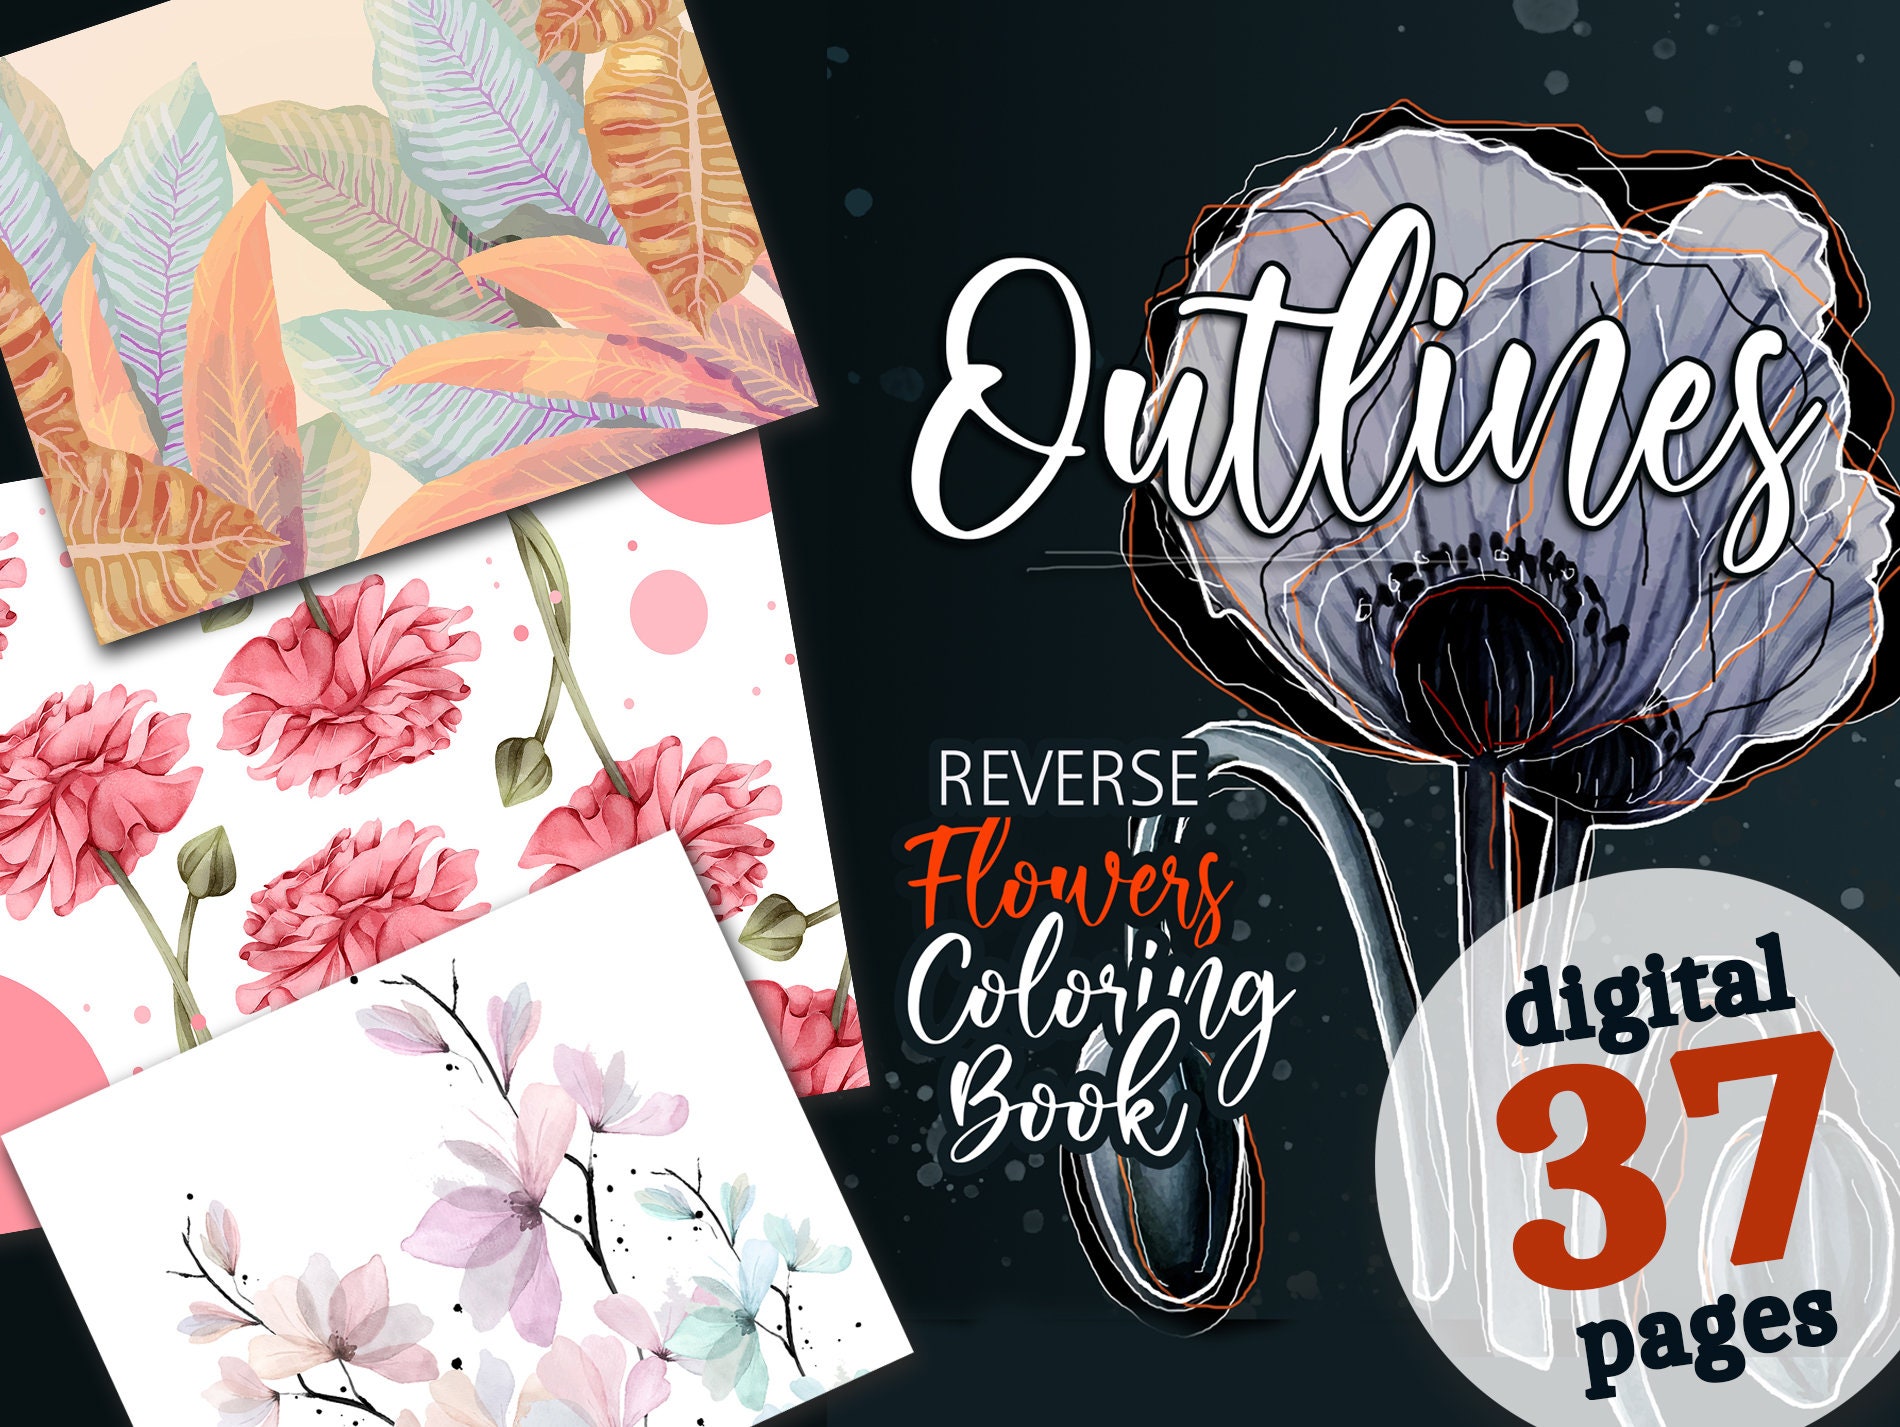 Reverse Coloring Book for Anxiety Relief: Anti-Stress Reverse Coloring Book  for Adults, Relaxing Patterns, flowers, Landscapes and more to Explore